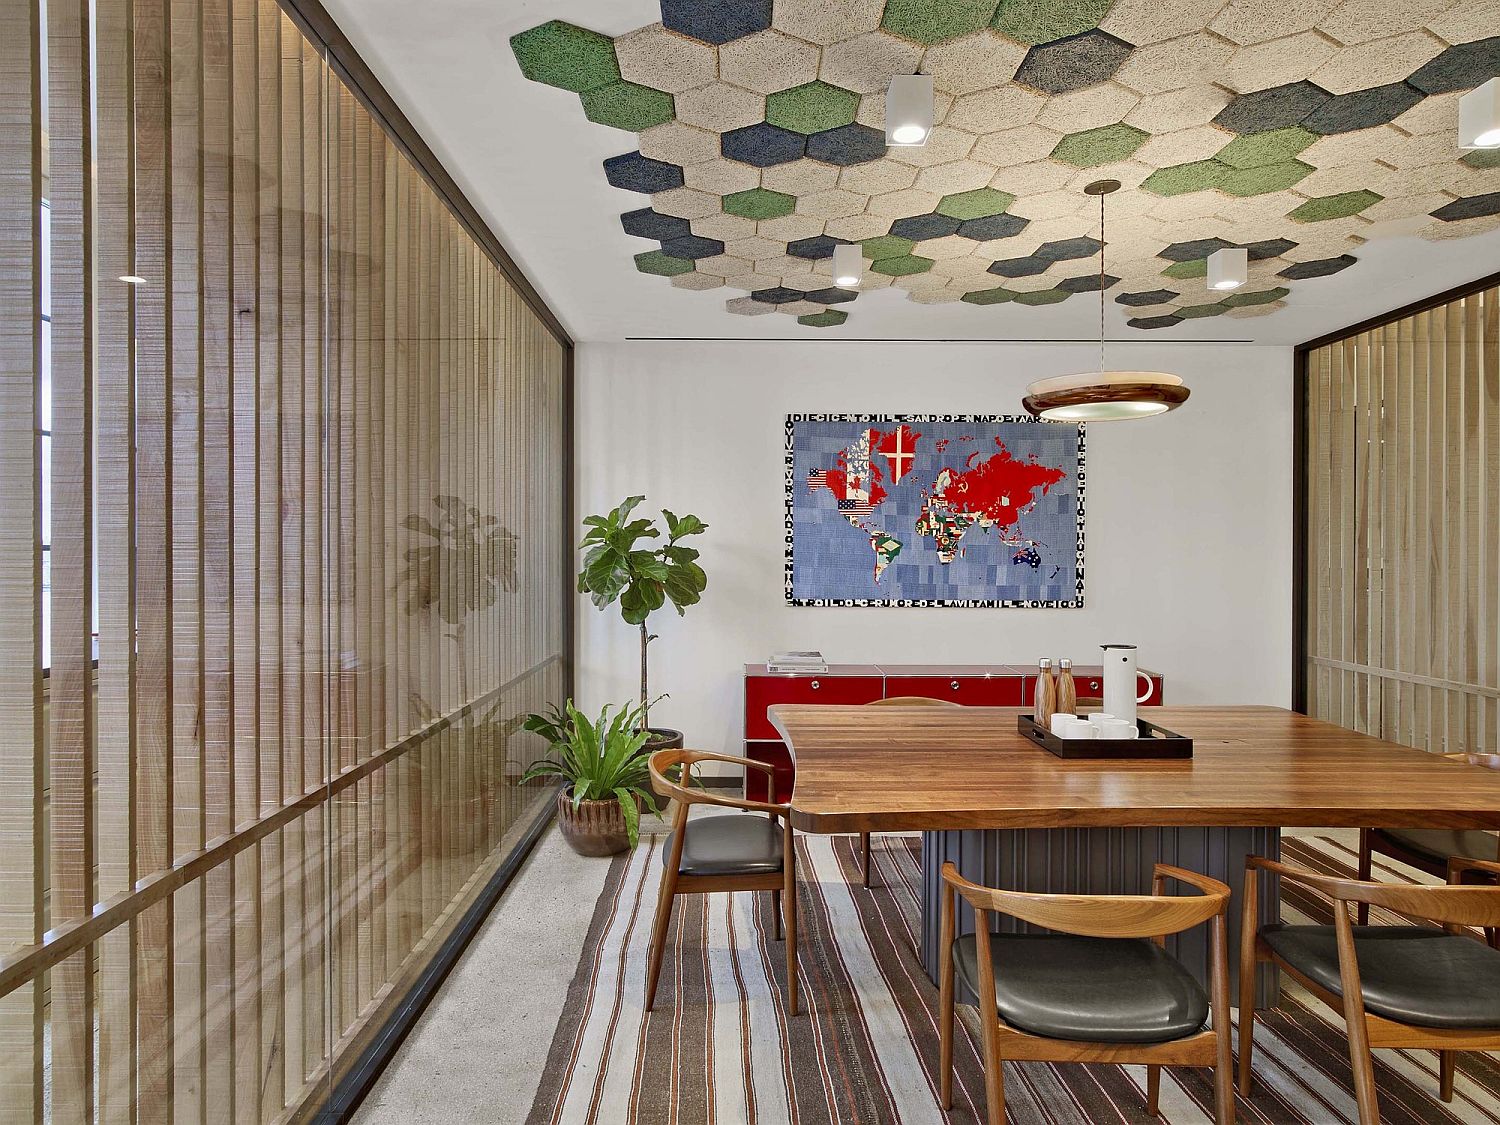 Meeting-room-with-hexagonal-tiles-on-the-ceiling-and-wooden-louvers-for-the-giant-window